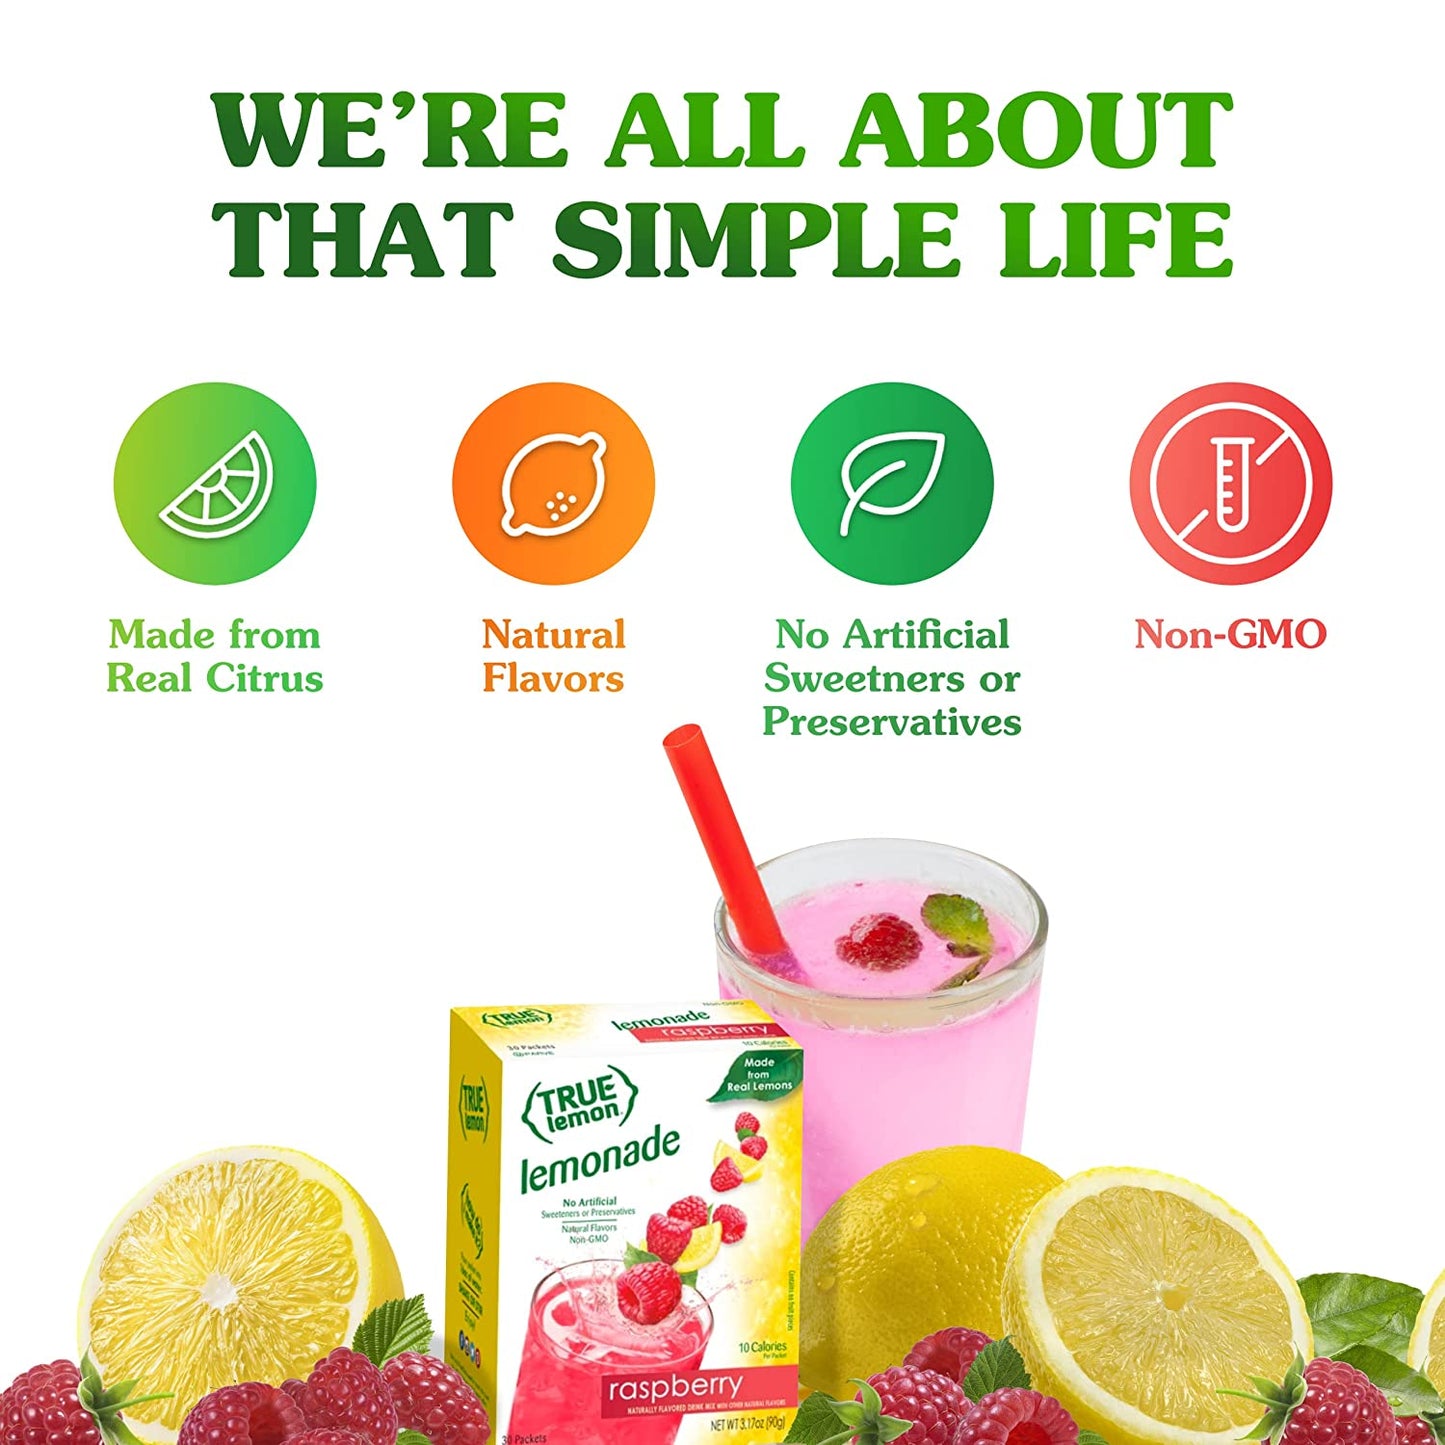 TRUE LEMON Raspberry Lemonade Drink Mix (30 Packets) Made from Real Lemon No Preservatives, No Artificial Sweeteners, Gluten Free Water Flavor Packets & Water Enhancer with Stevia, 3.17 Oz(Pack of 30)